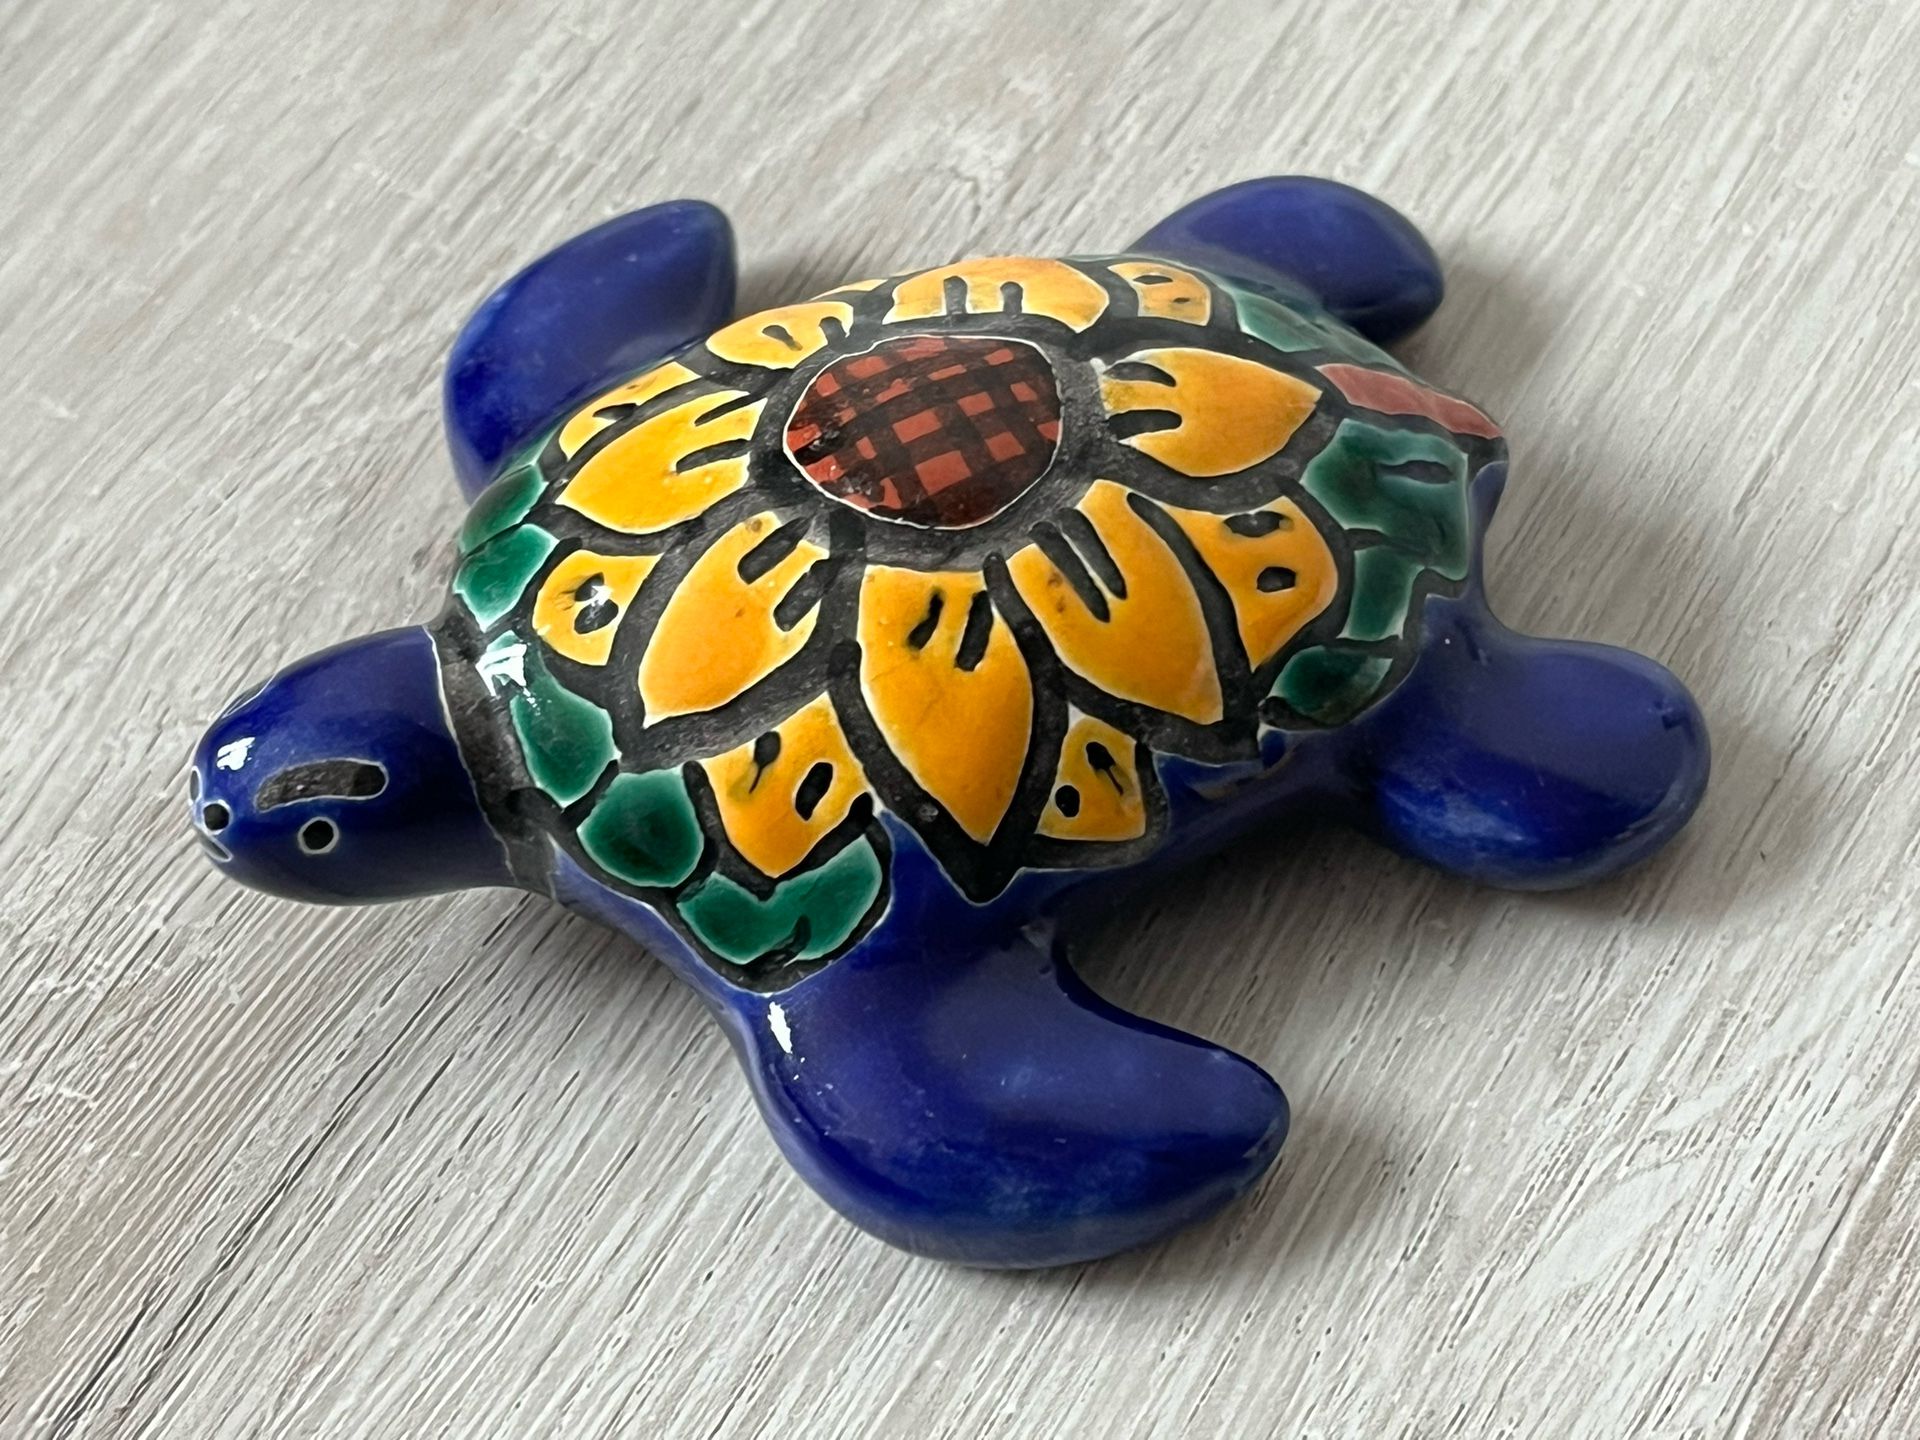 Talavera Style Hand Painted Mexican Pottery Turtle